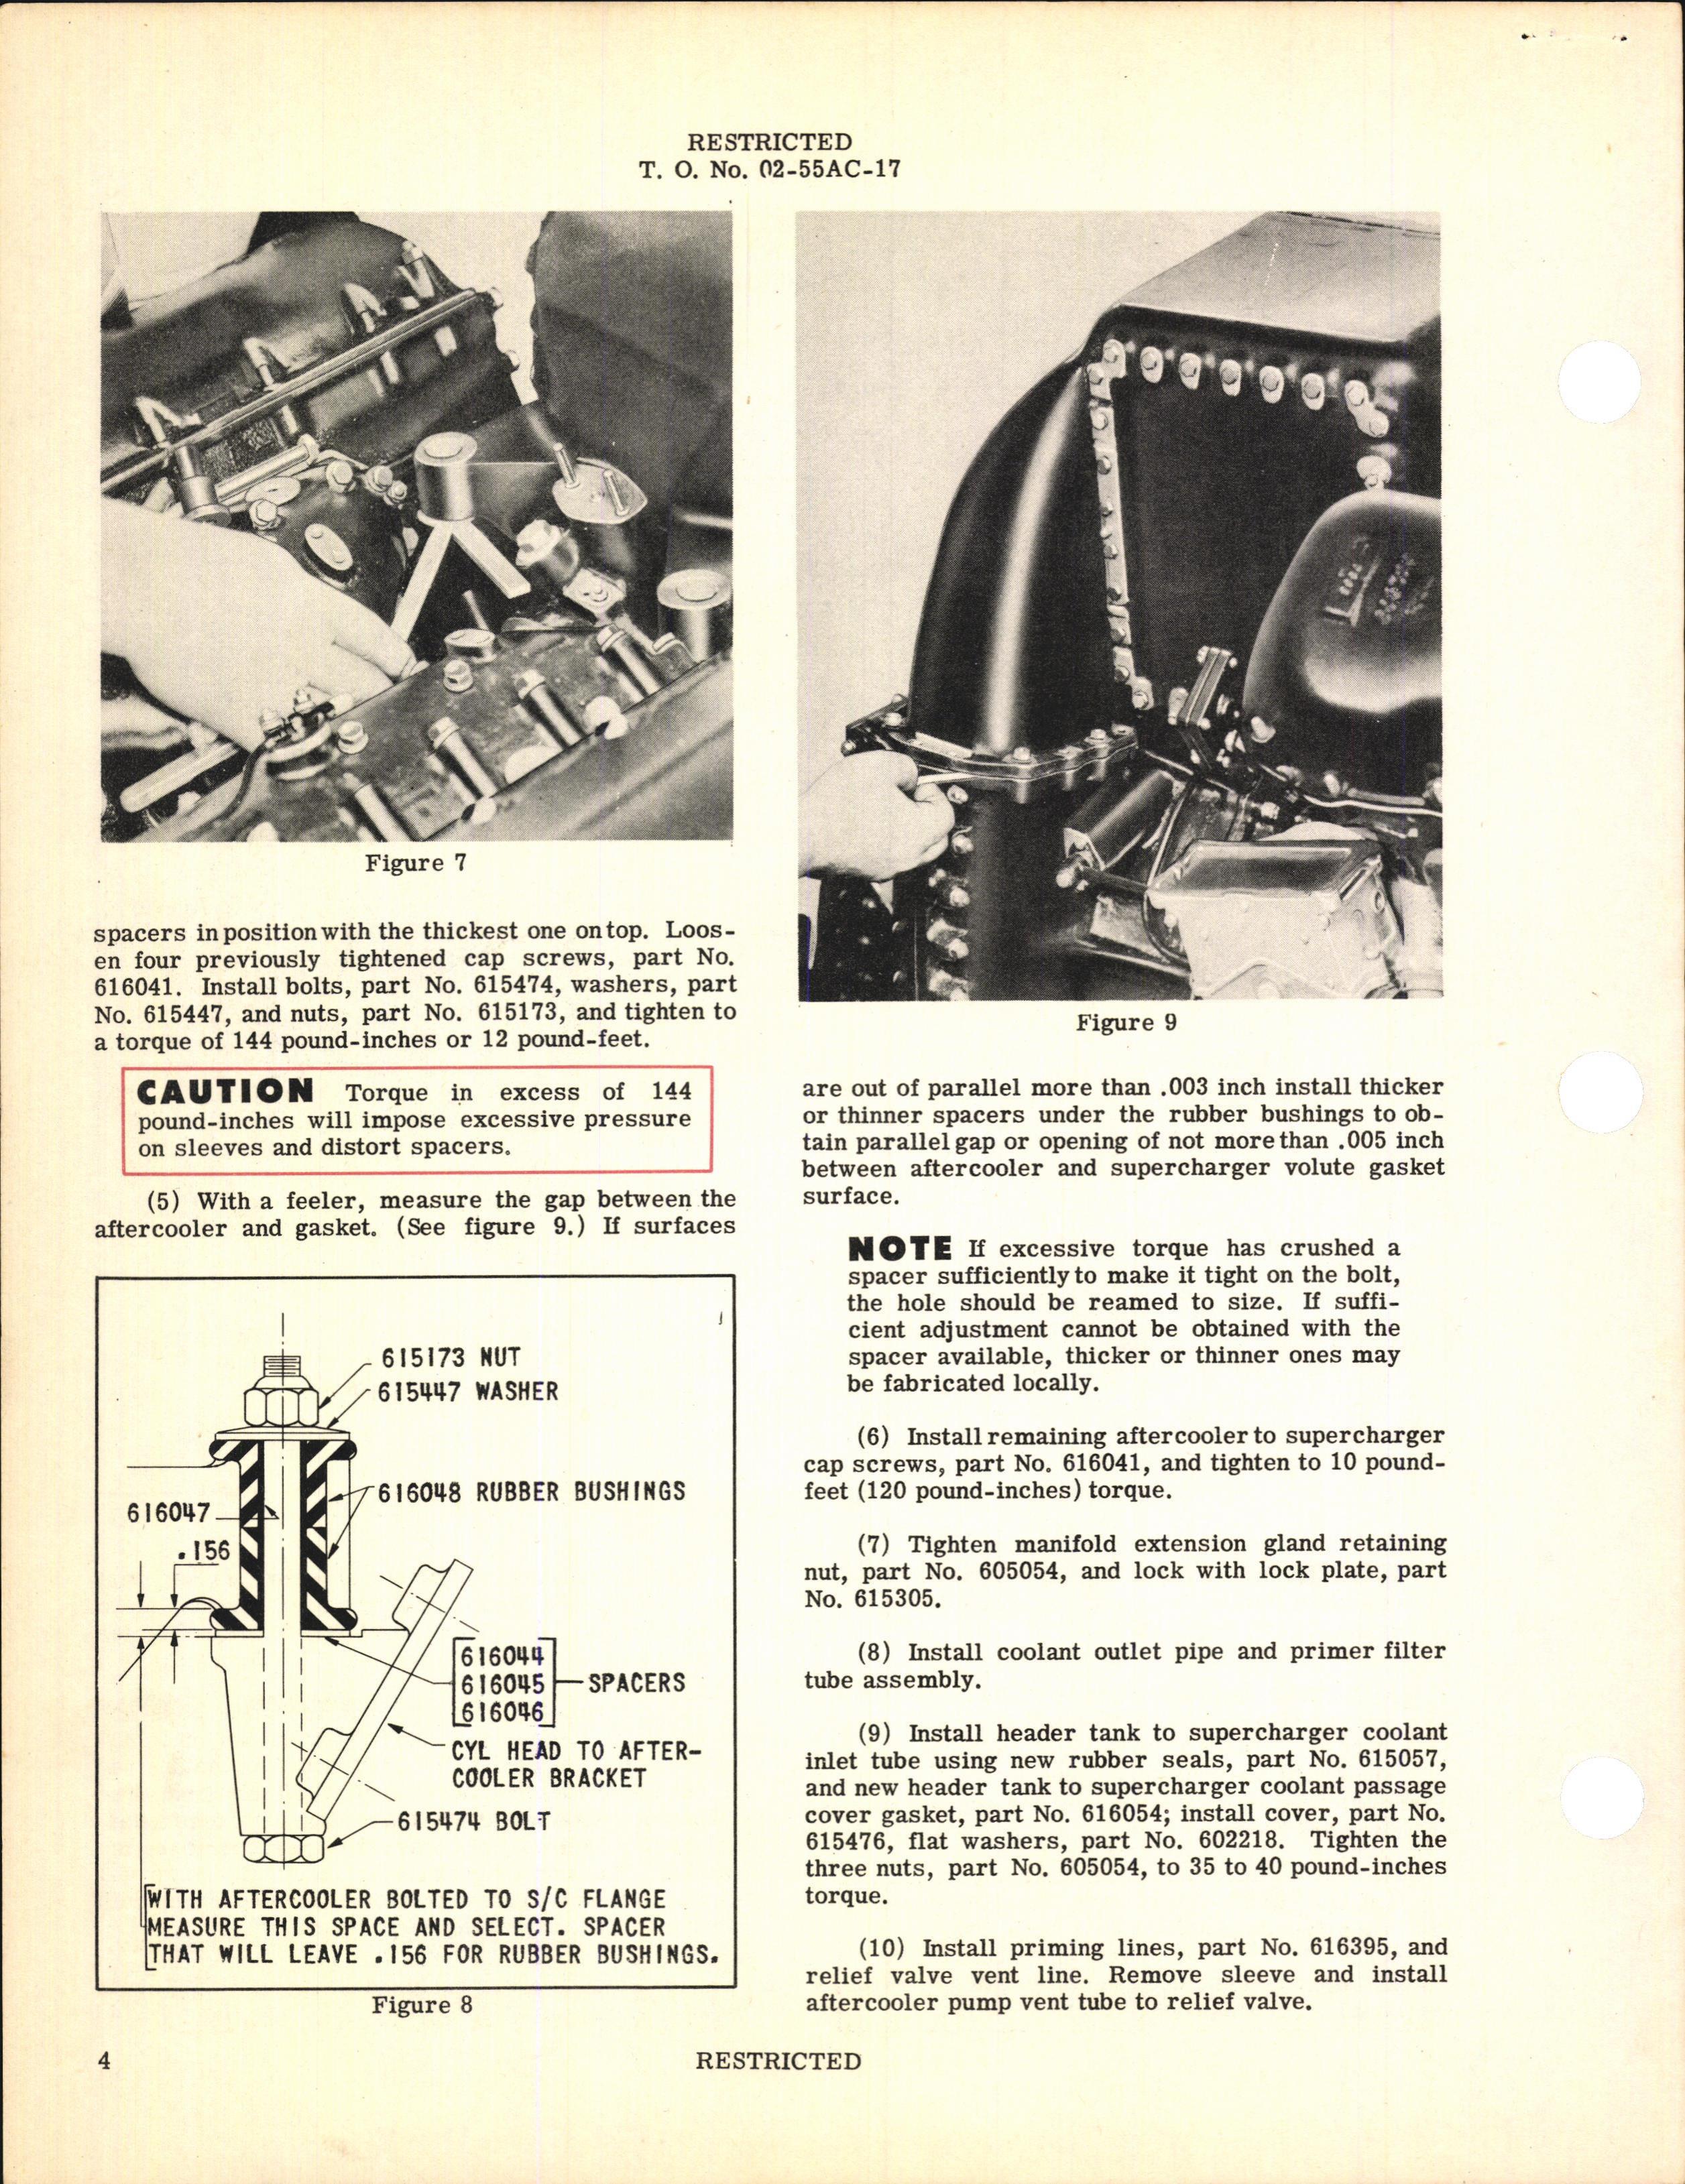 Sample page 4 from AirCorps Library document: Aftercooler Overhaul Procedure and Replacement of Aftercooler Assemblies for V-1650-3 and -7